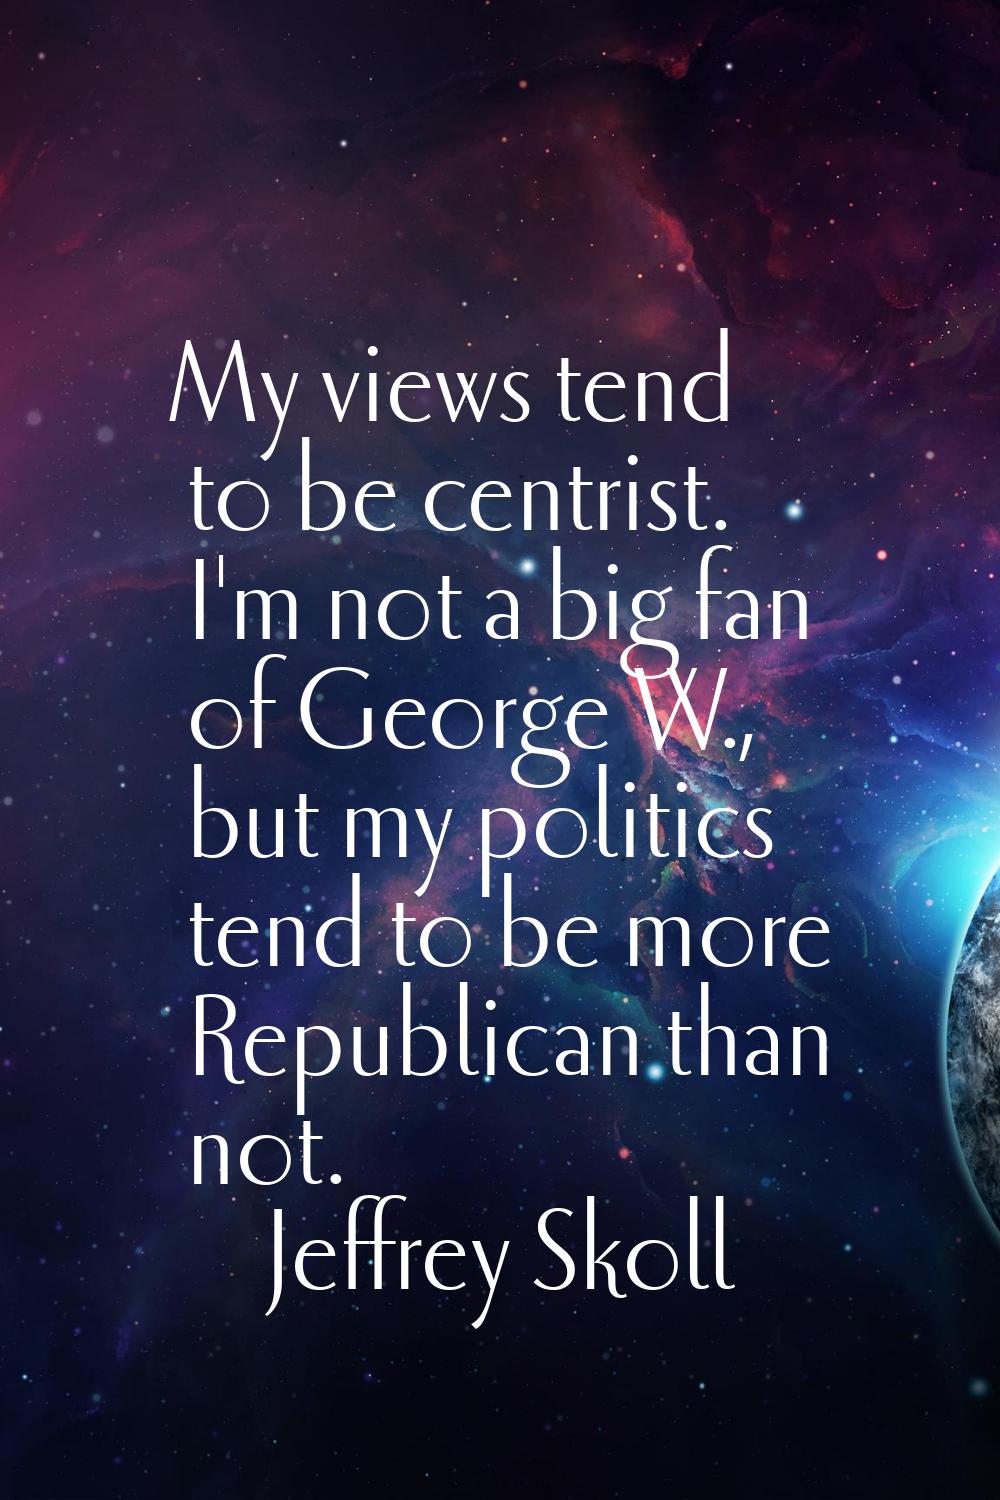 My views tend to be centrist. I'm not a big fan of George W., but my politics tend to be more Repub